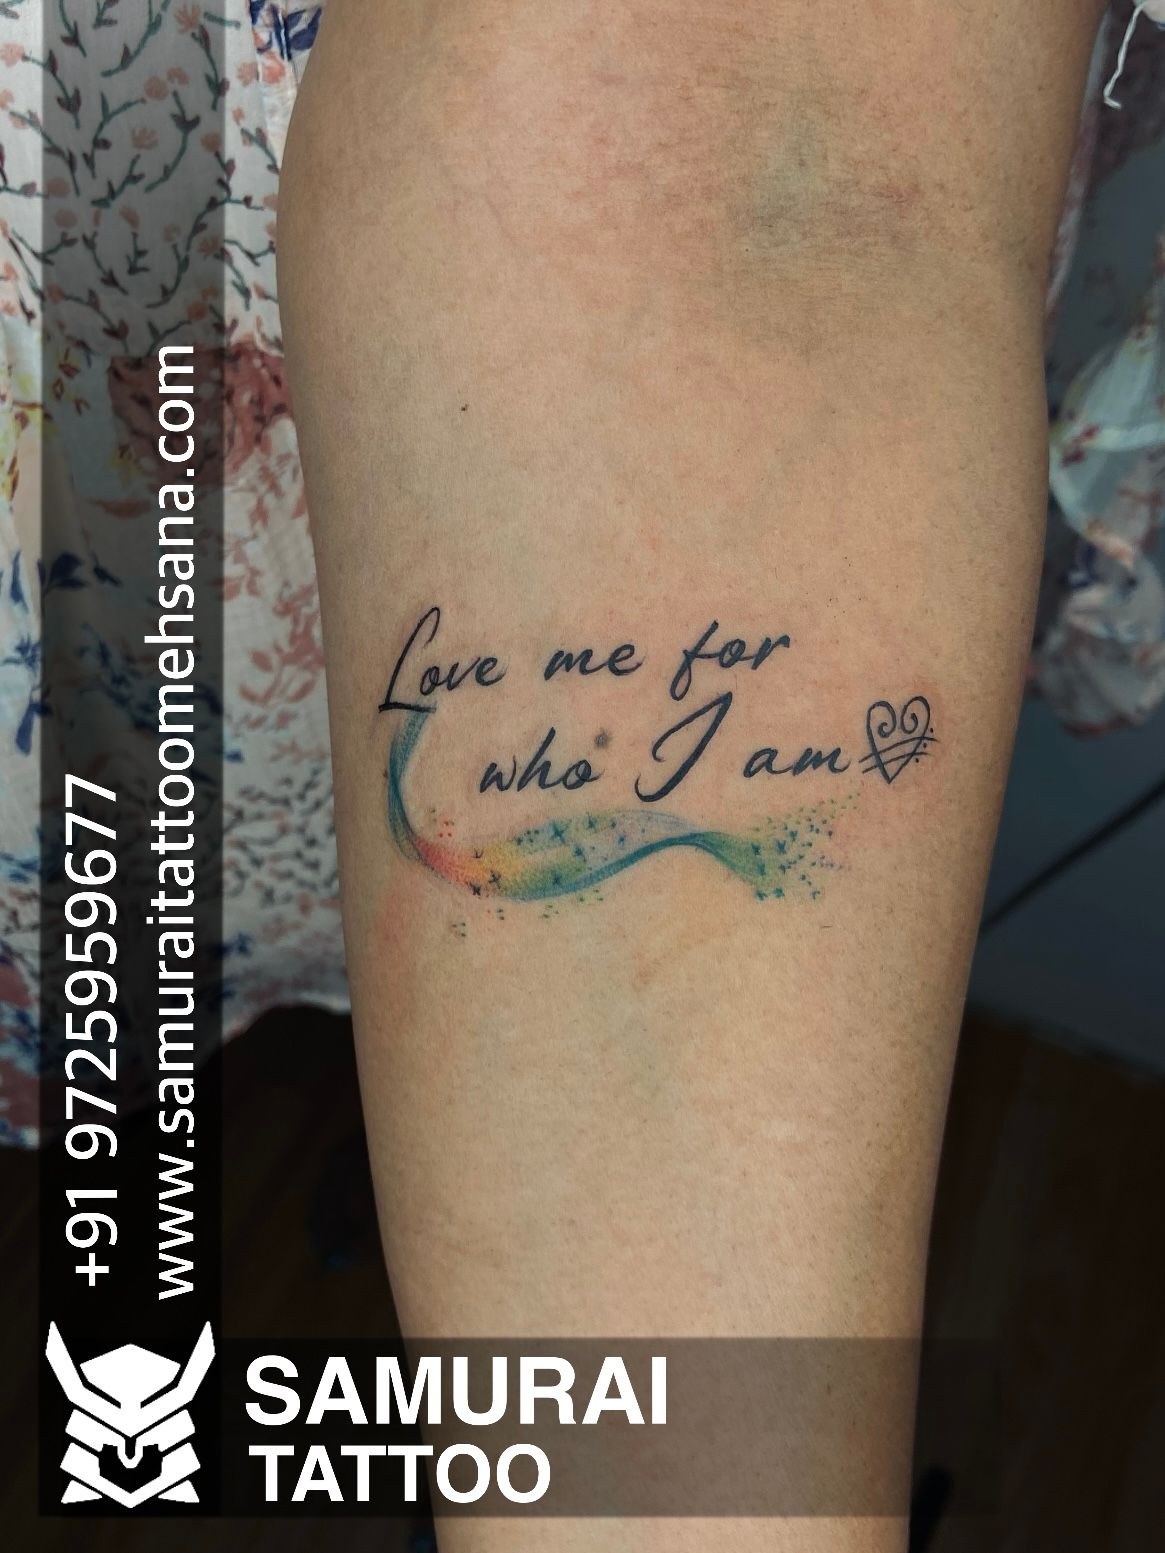 Aggregate 116+ thoughts for tattoo latest